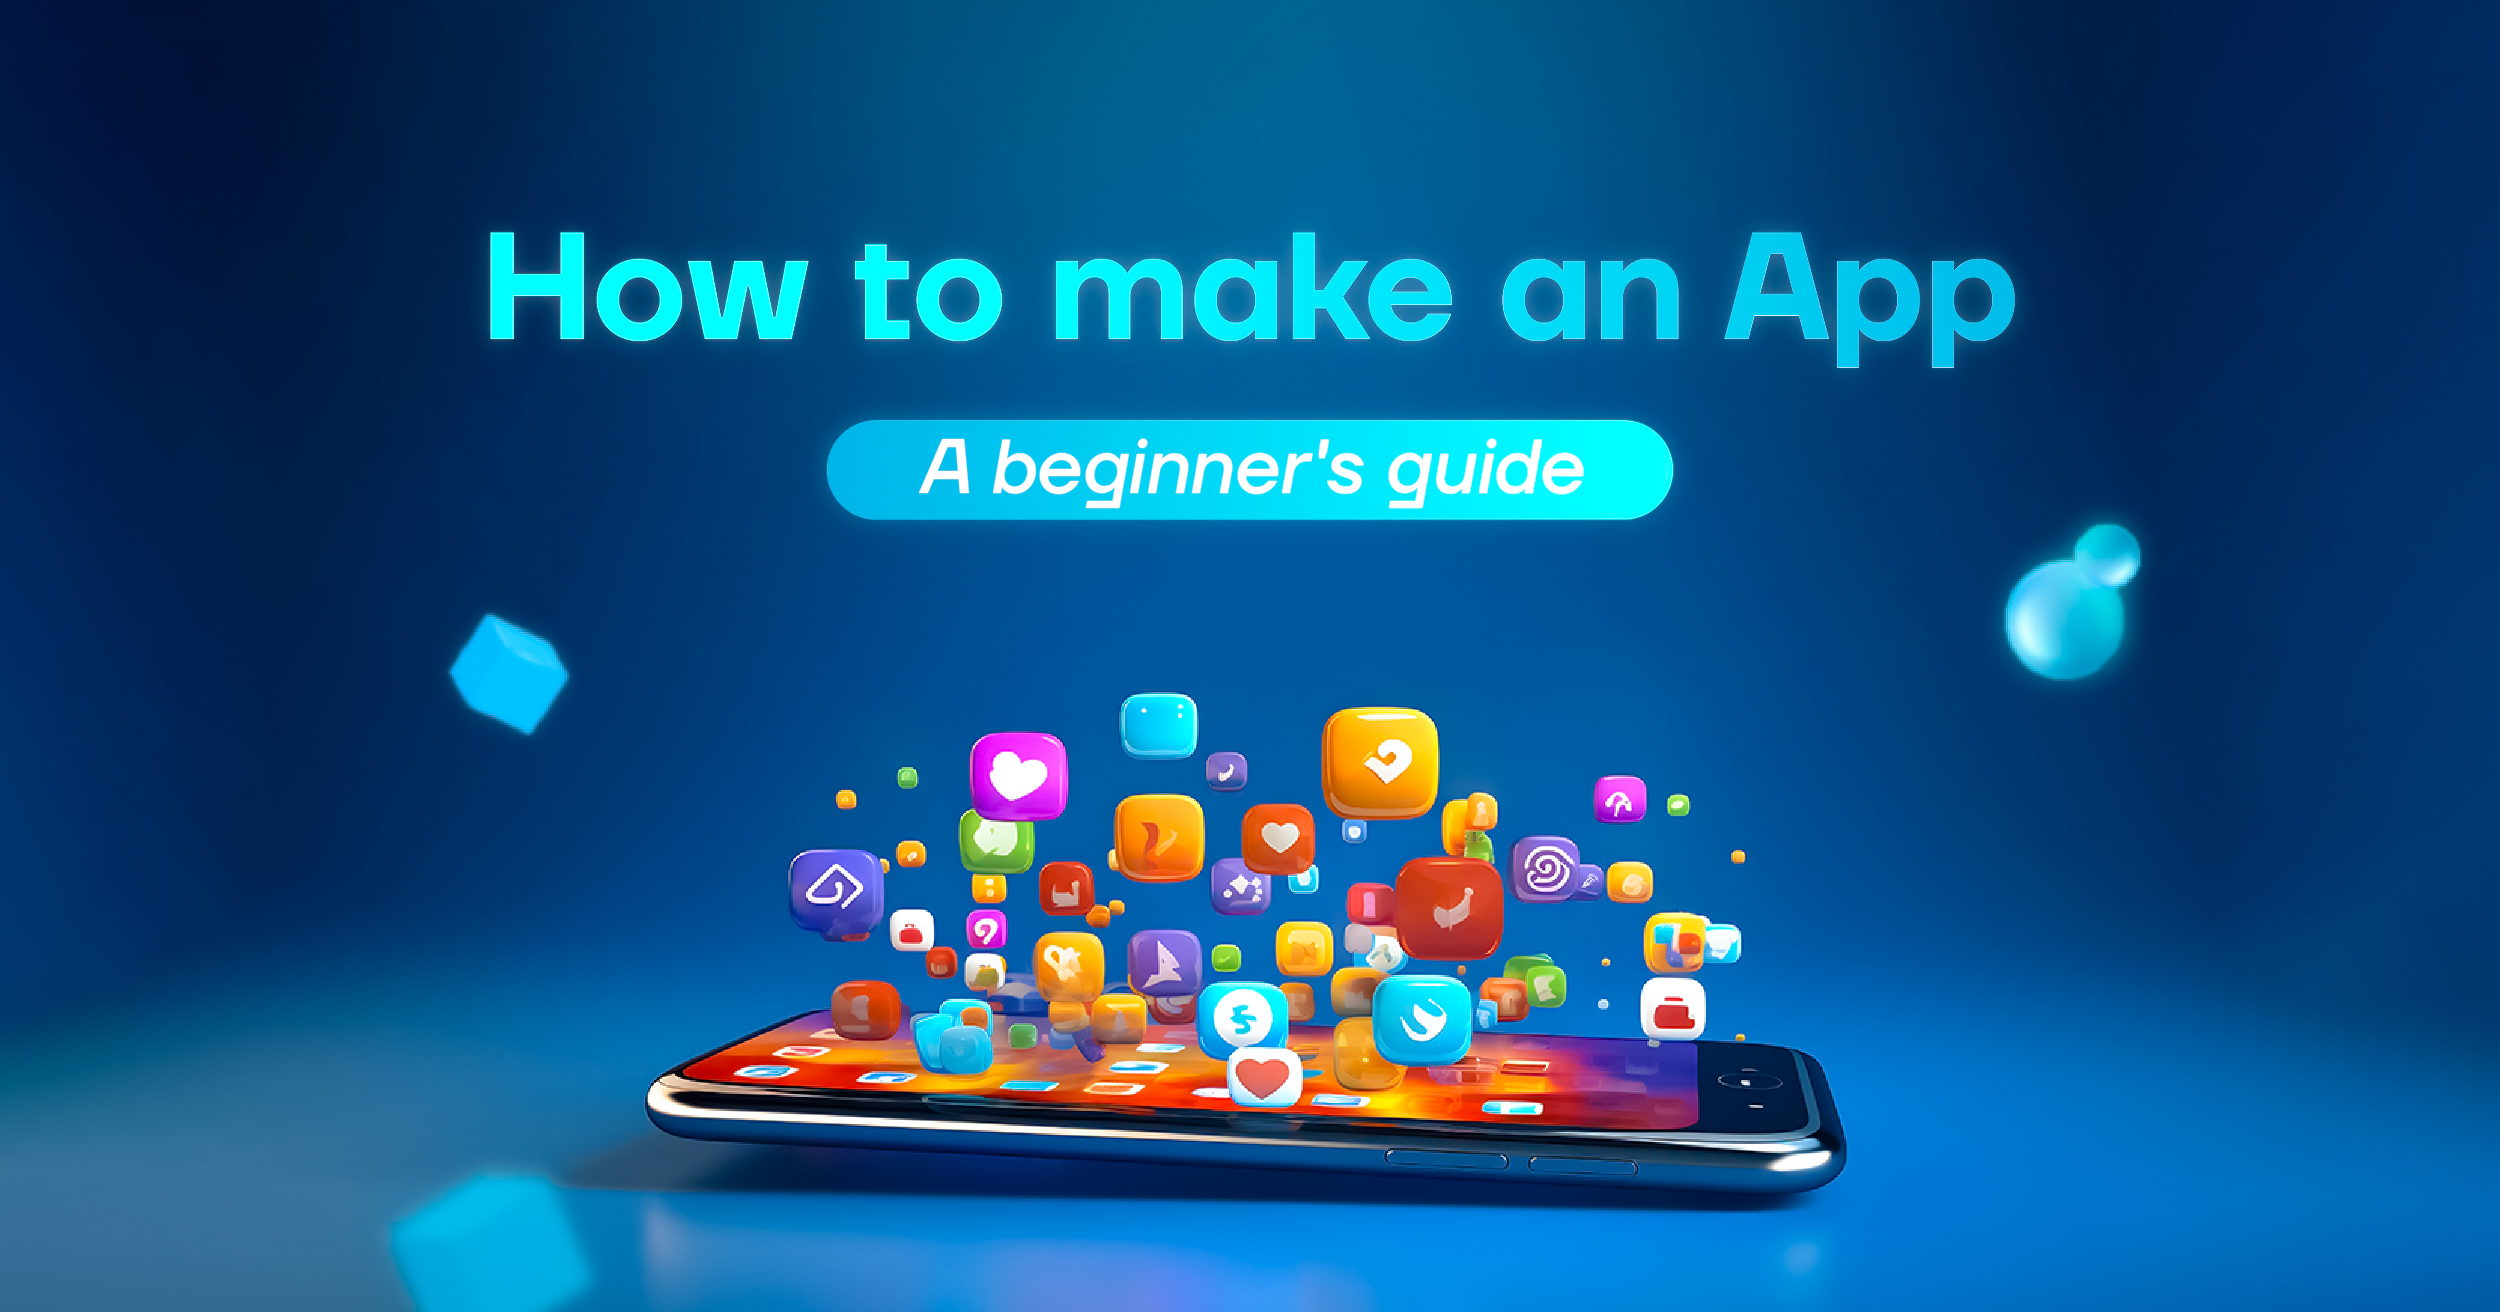 How to Make an App - A Beginner's guide